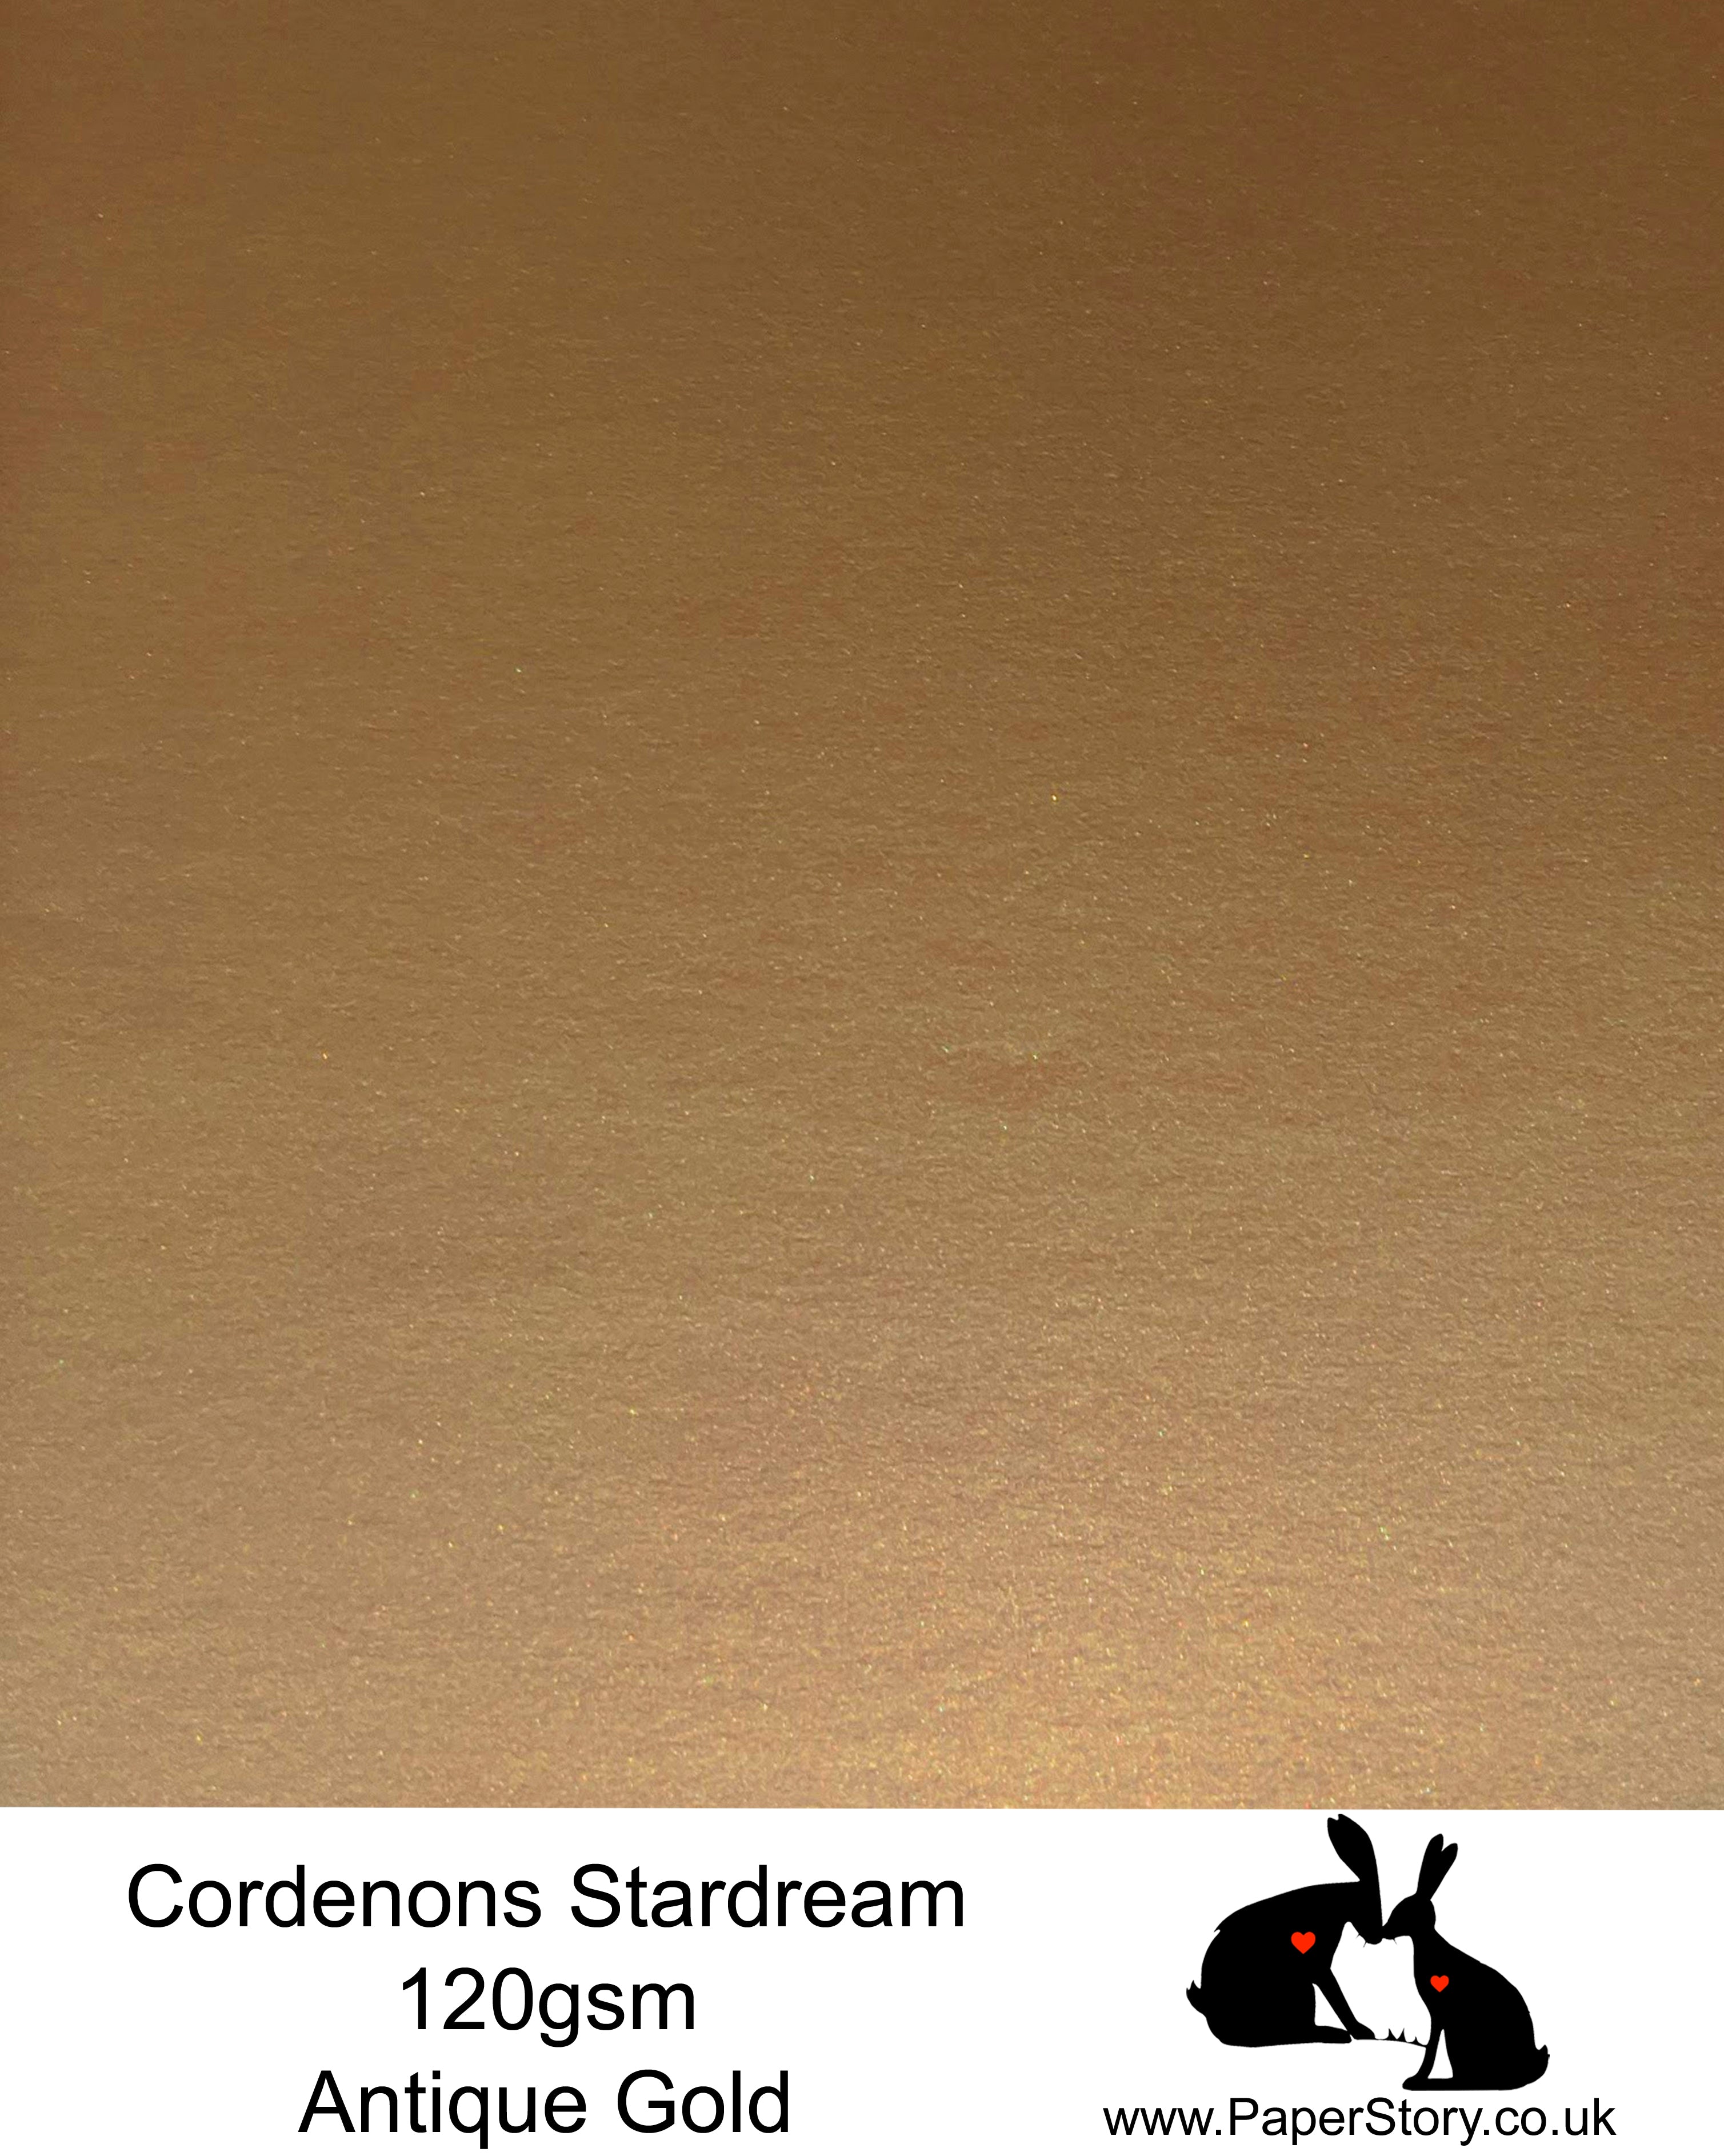 A4 Stardream 120gsm paper for Papercutting, craft, flower making  and wedding stationery. Antique gold has beautiful copper warm undertones. Stardream is a luxury Italian paper from Italy, it is a double sided quality Pearlescent paper with a matching colour core. FSC Certified, acid free, archival and PH Neutral